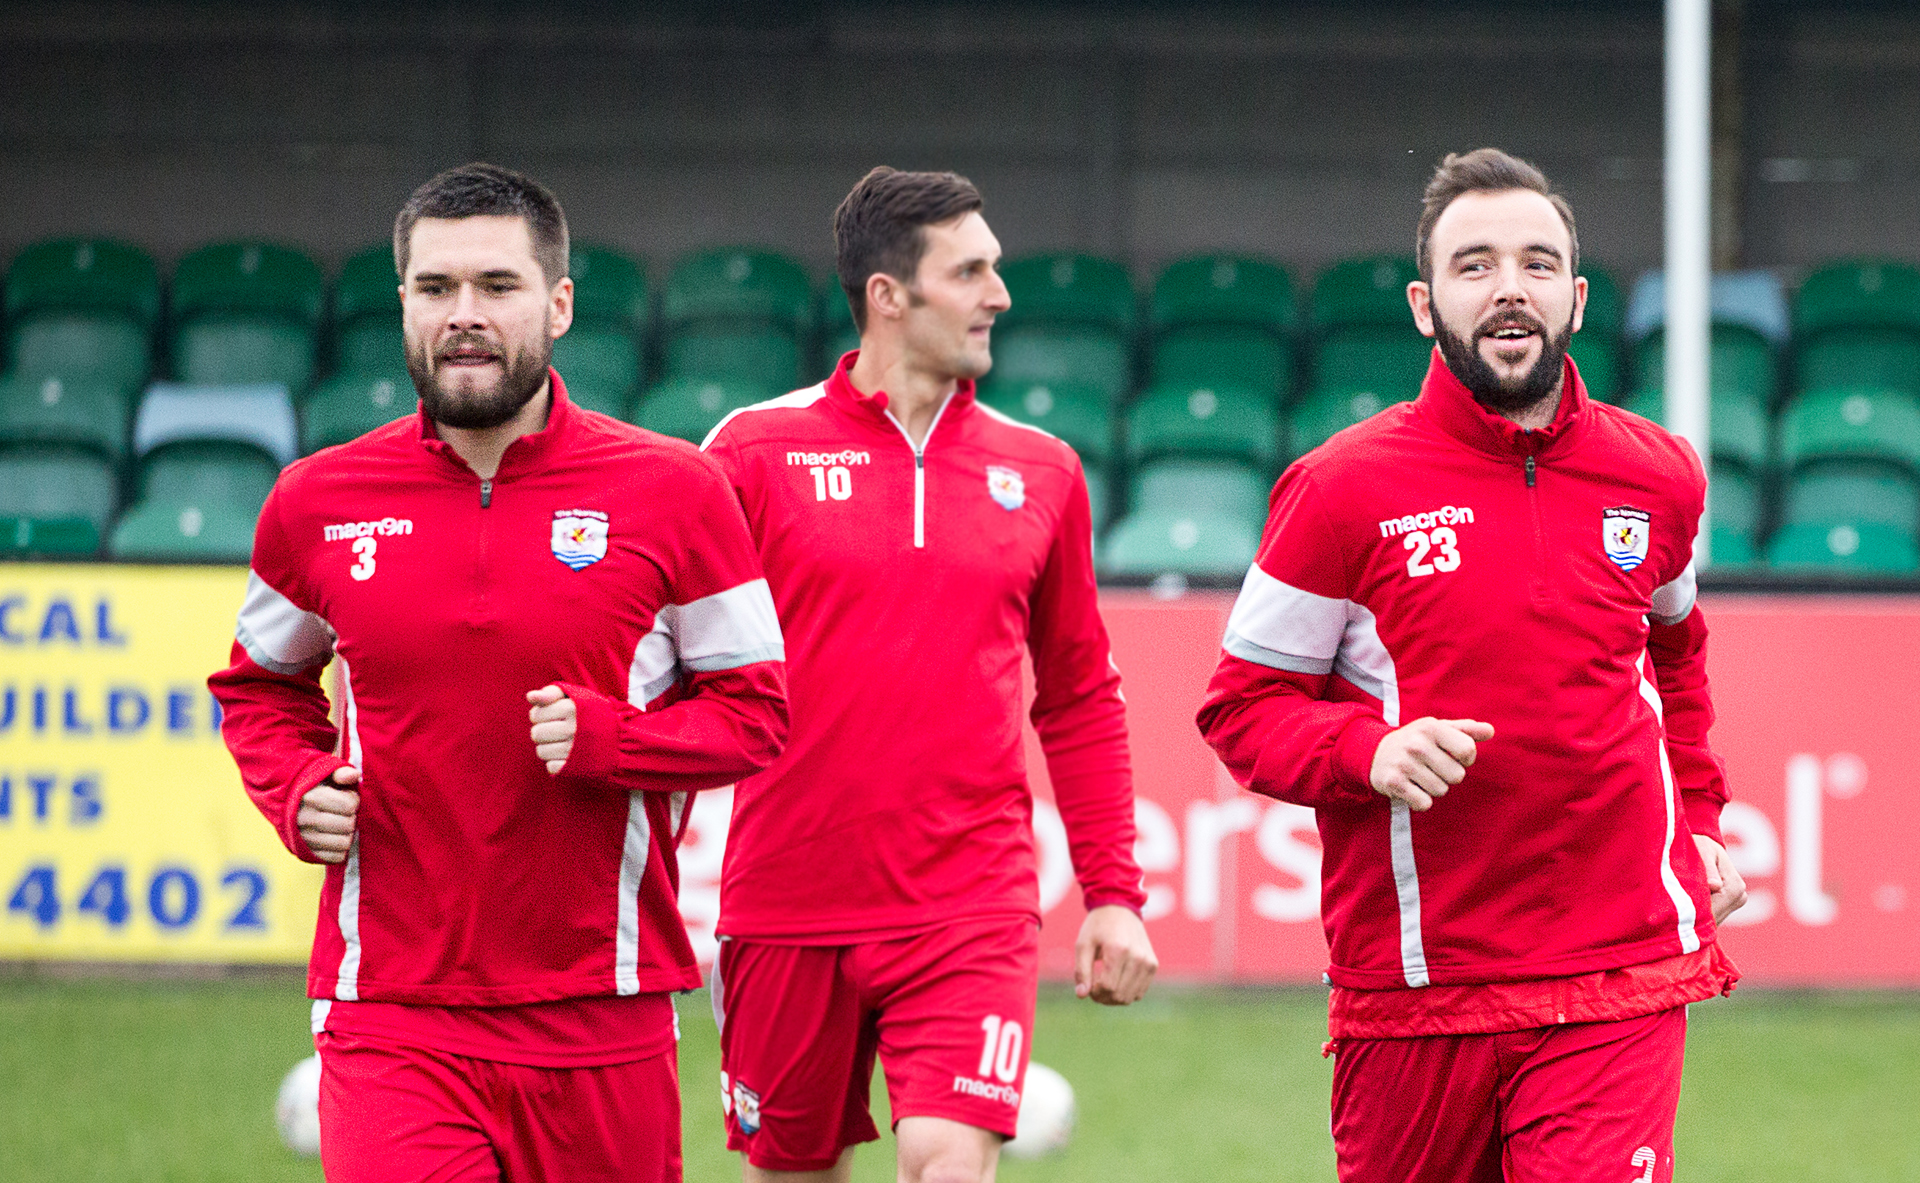 Kai Edwards (left) and Mike Pearson (right) have left Connah's Quay Nomads